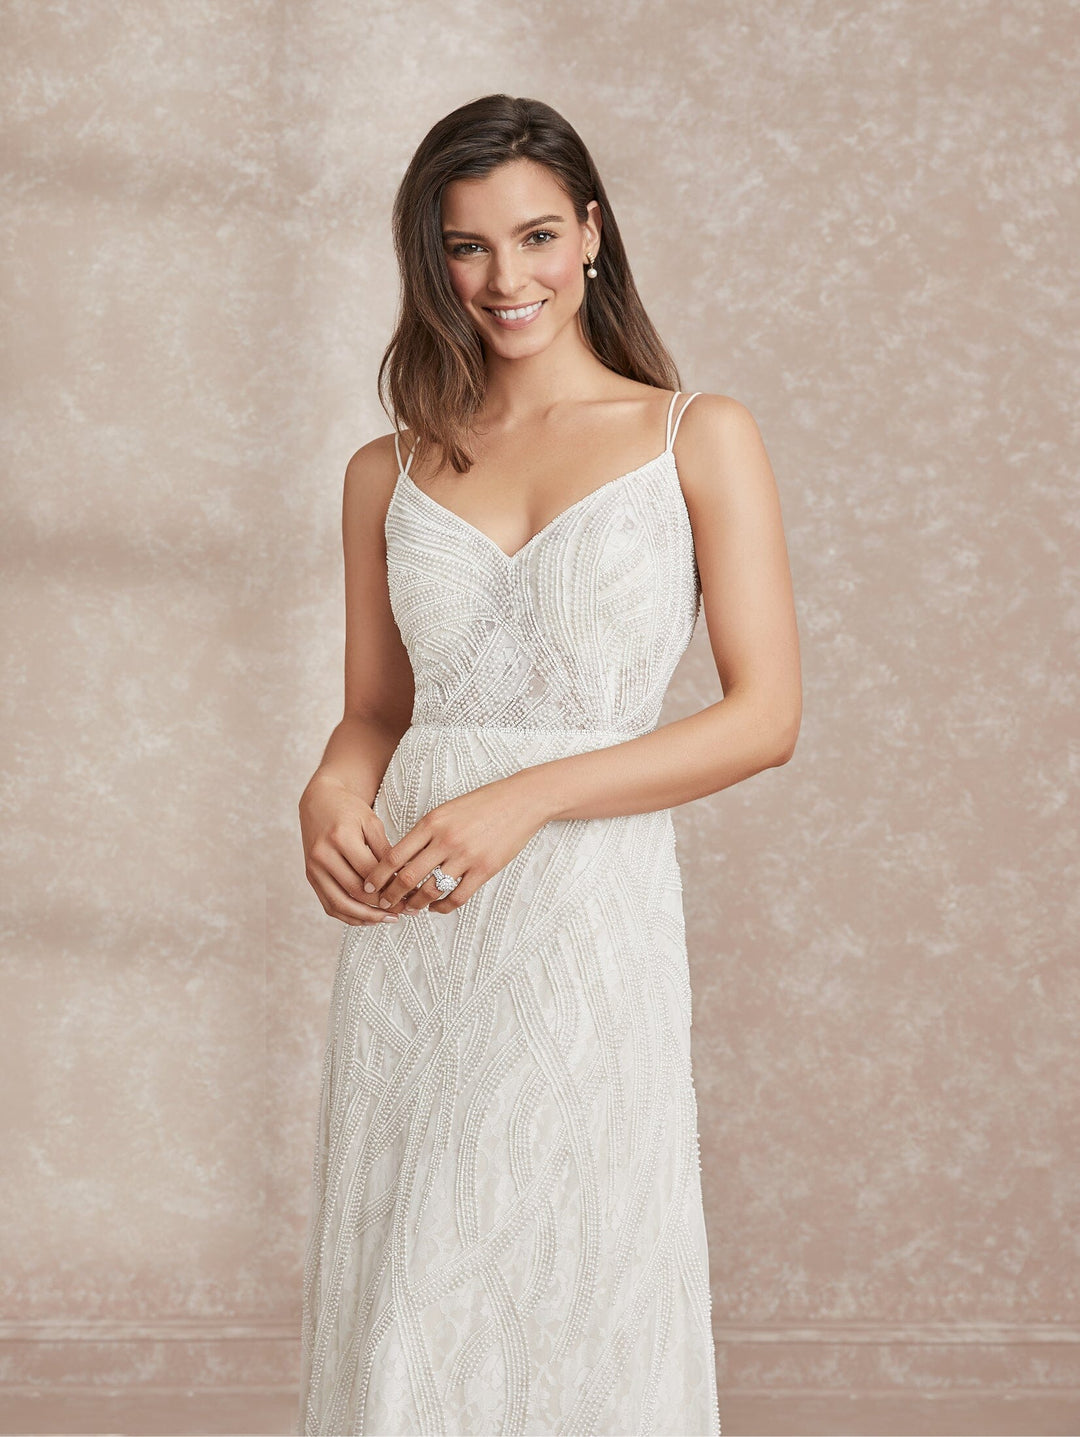 Pearl Beaded A-line Wedding Dress by Adrianna Papell 40301